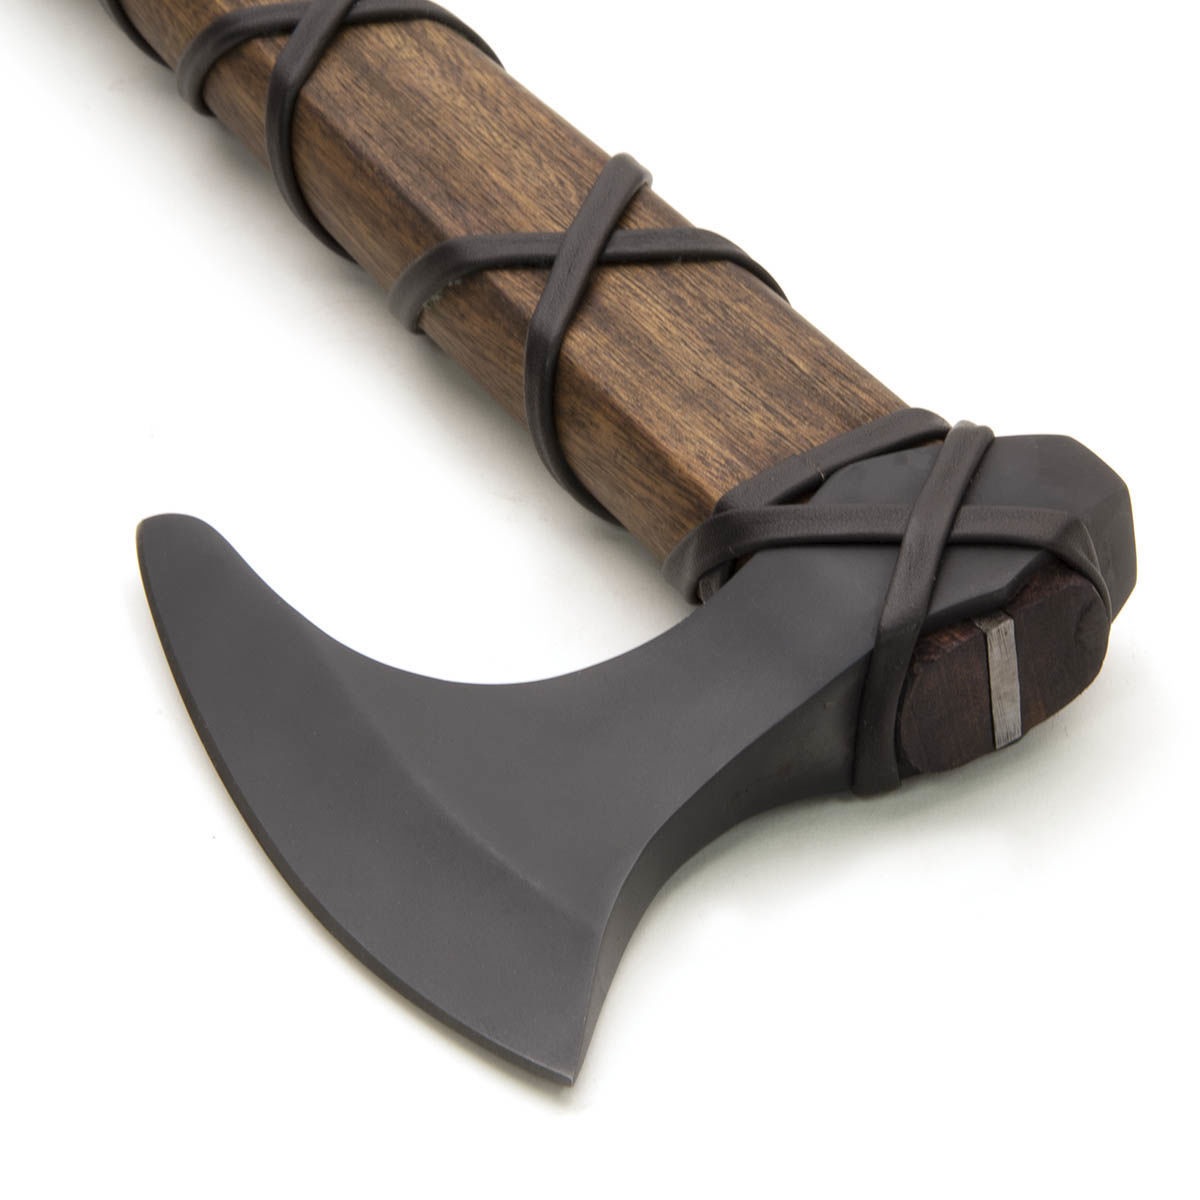 Ragnar's Axe with Leather Hanger